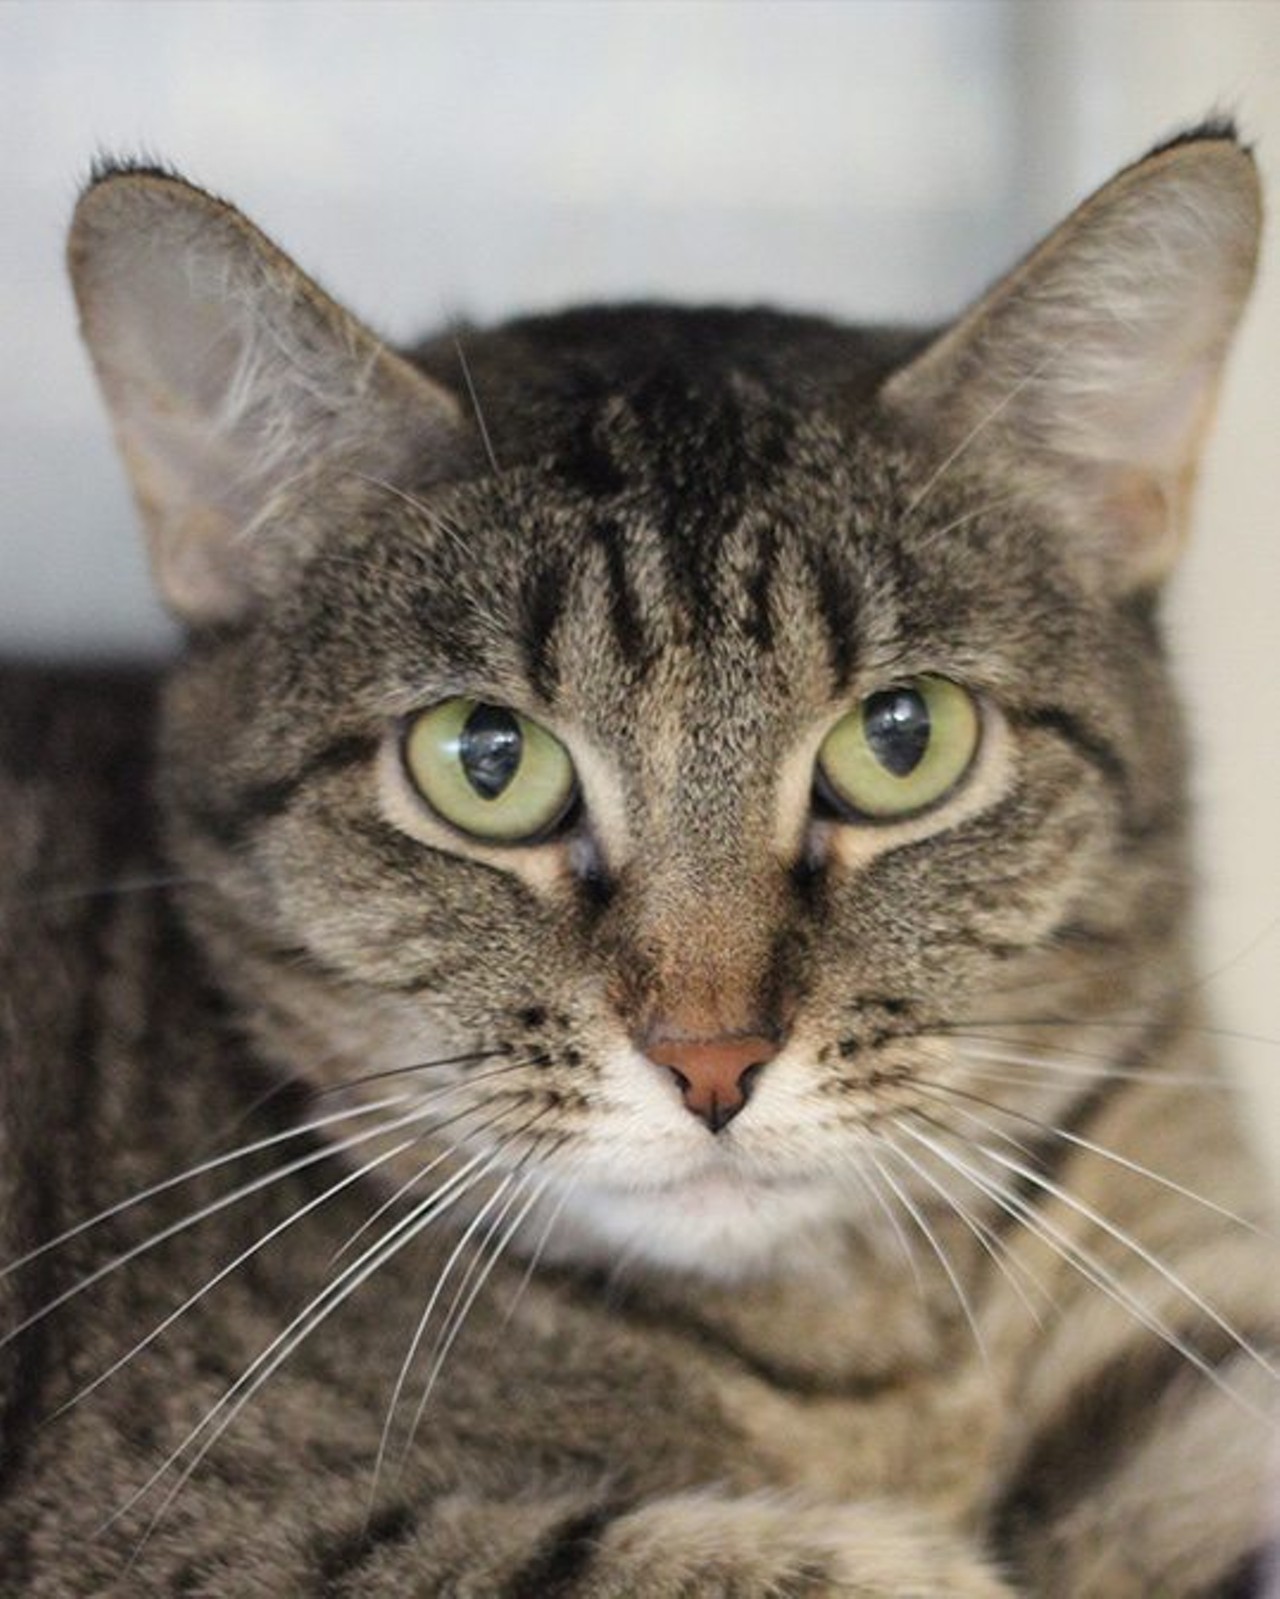 Nikki
"I&#146;m a relaxed and fairly calm tabby cat. Actually, I&#146;m a bit lazy and can be found cat napping and quietly lounging around. I&#146;m a friendly girl and enjoy being pet. If you&#146;re looking for a laid-back companion to keep you company, then come by and visit me!"